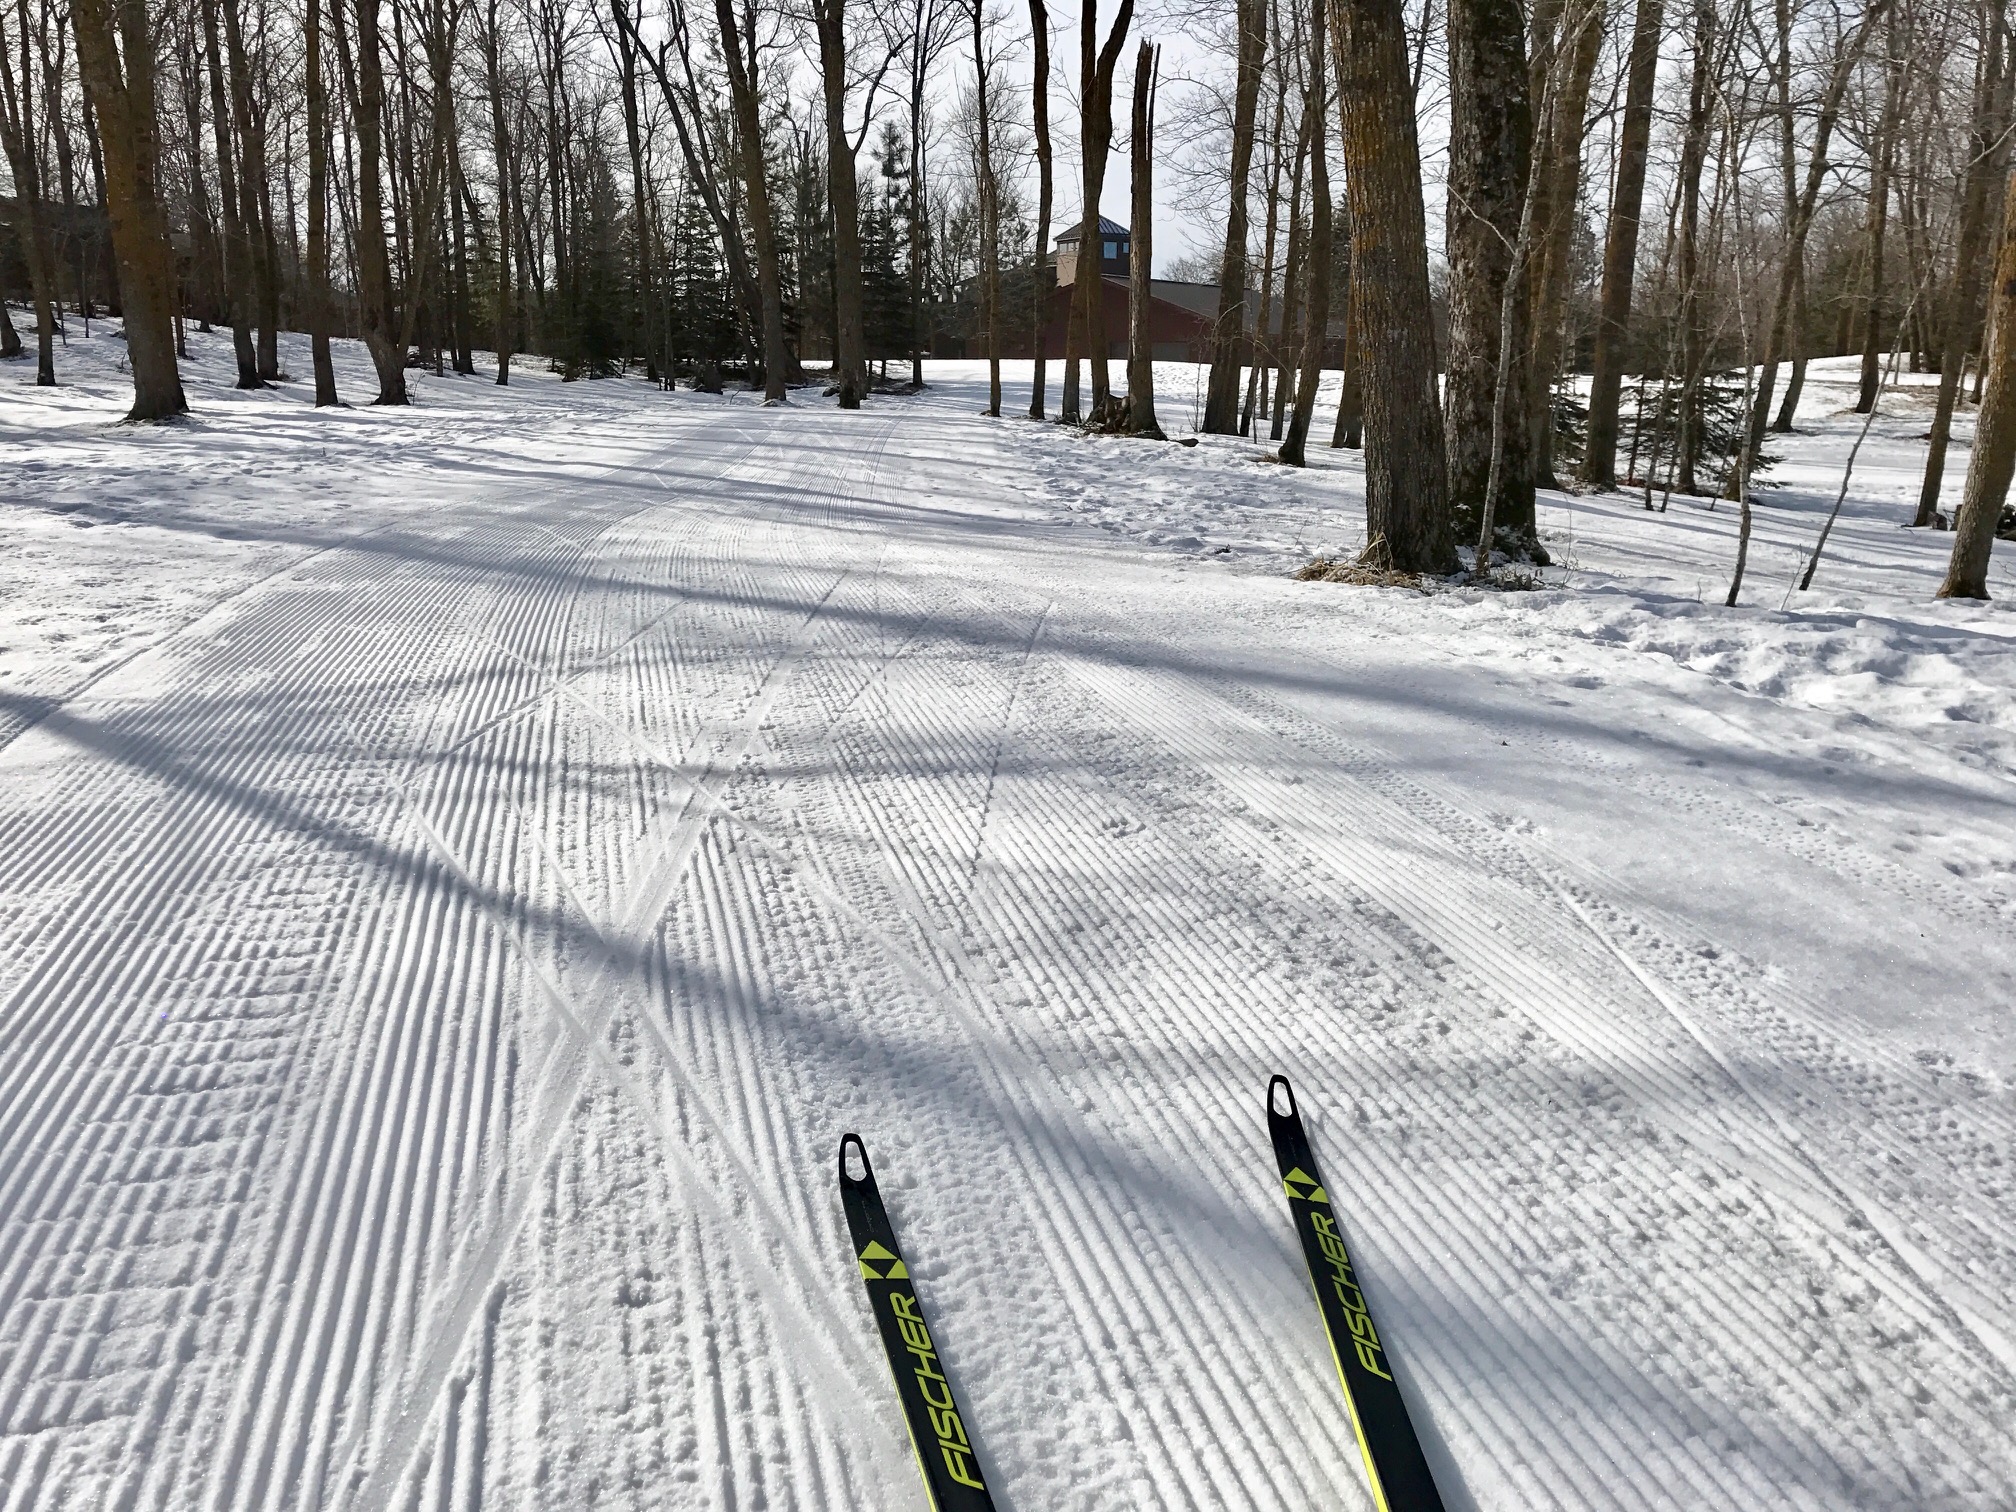 Great skate skiing conditions. February 24th, 2017.